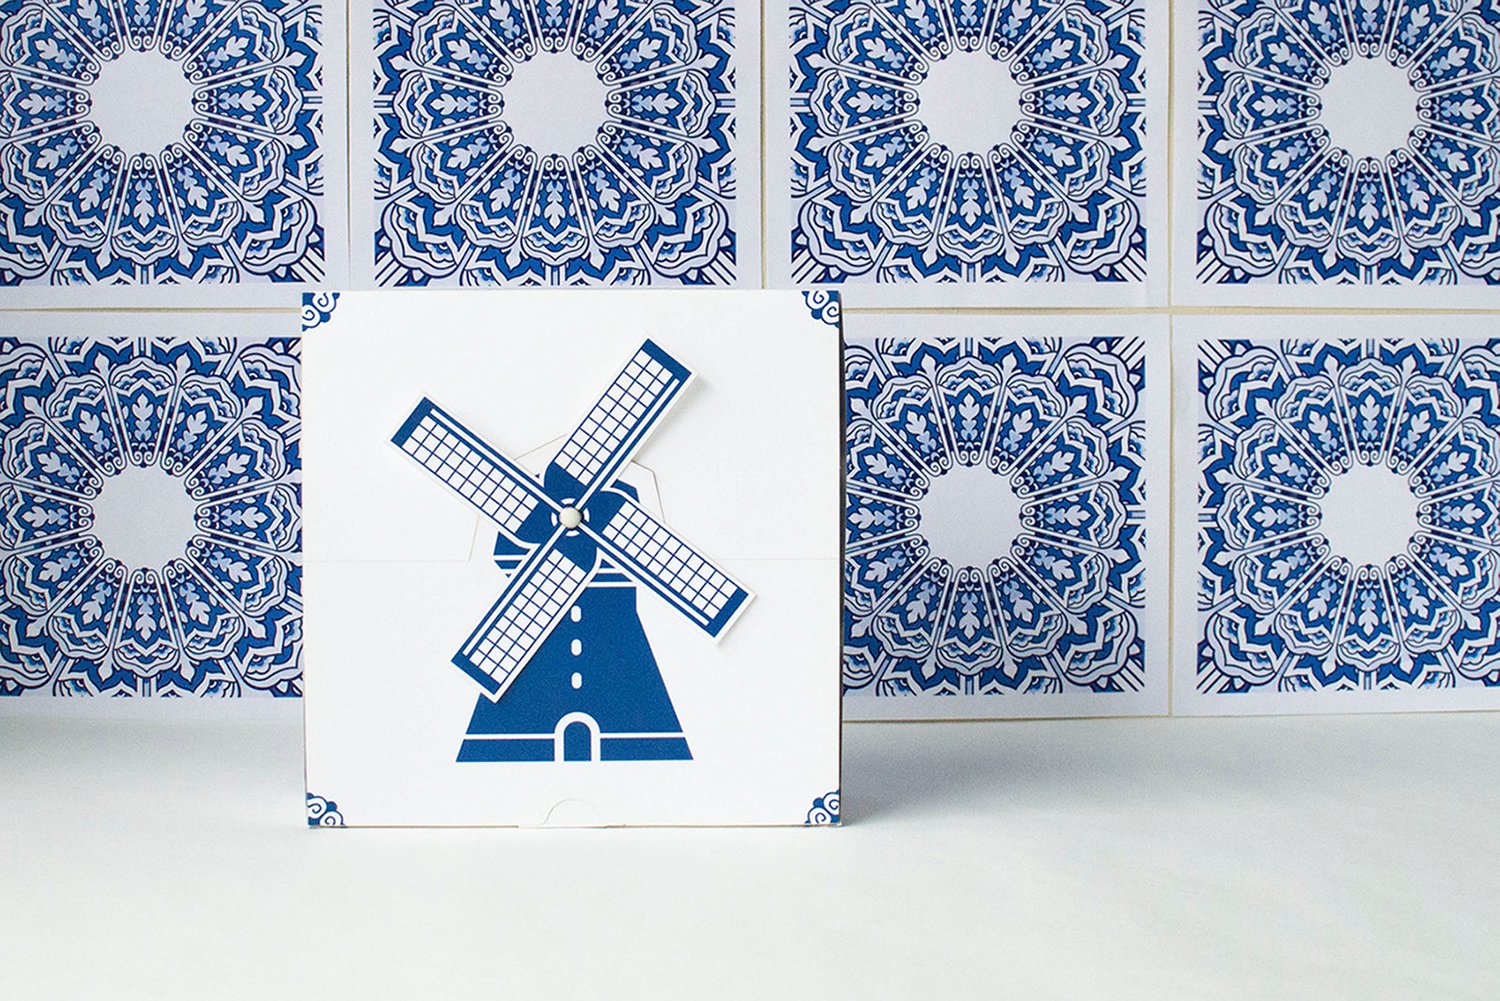 The top of the box folded up features a Dutch windmill with sails that can rotate.